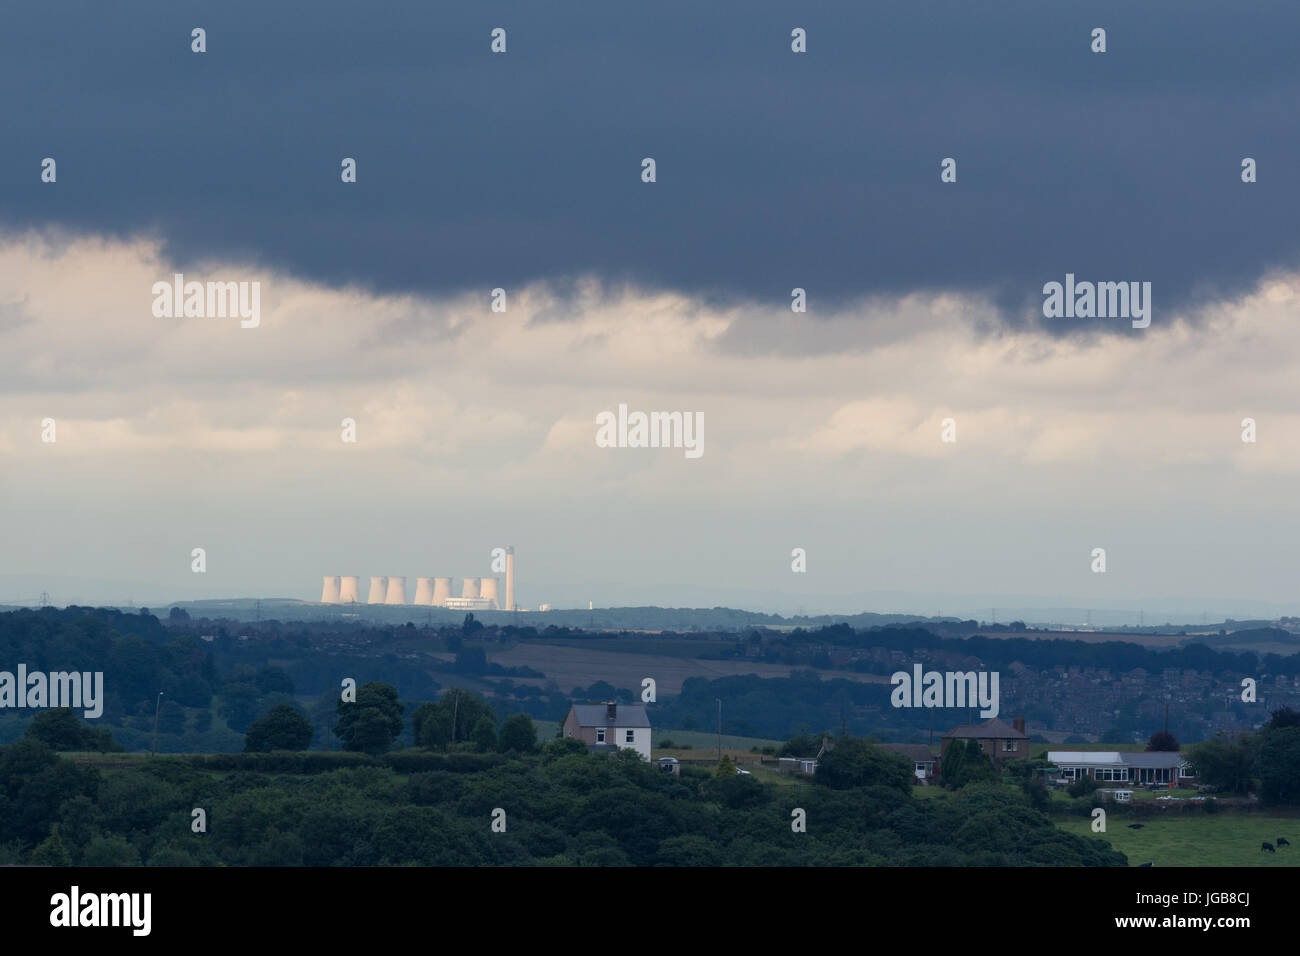 Eggborough coal fired power station under a stormy sky, North Yorkshire, England, UK Stock Photo